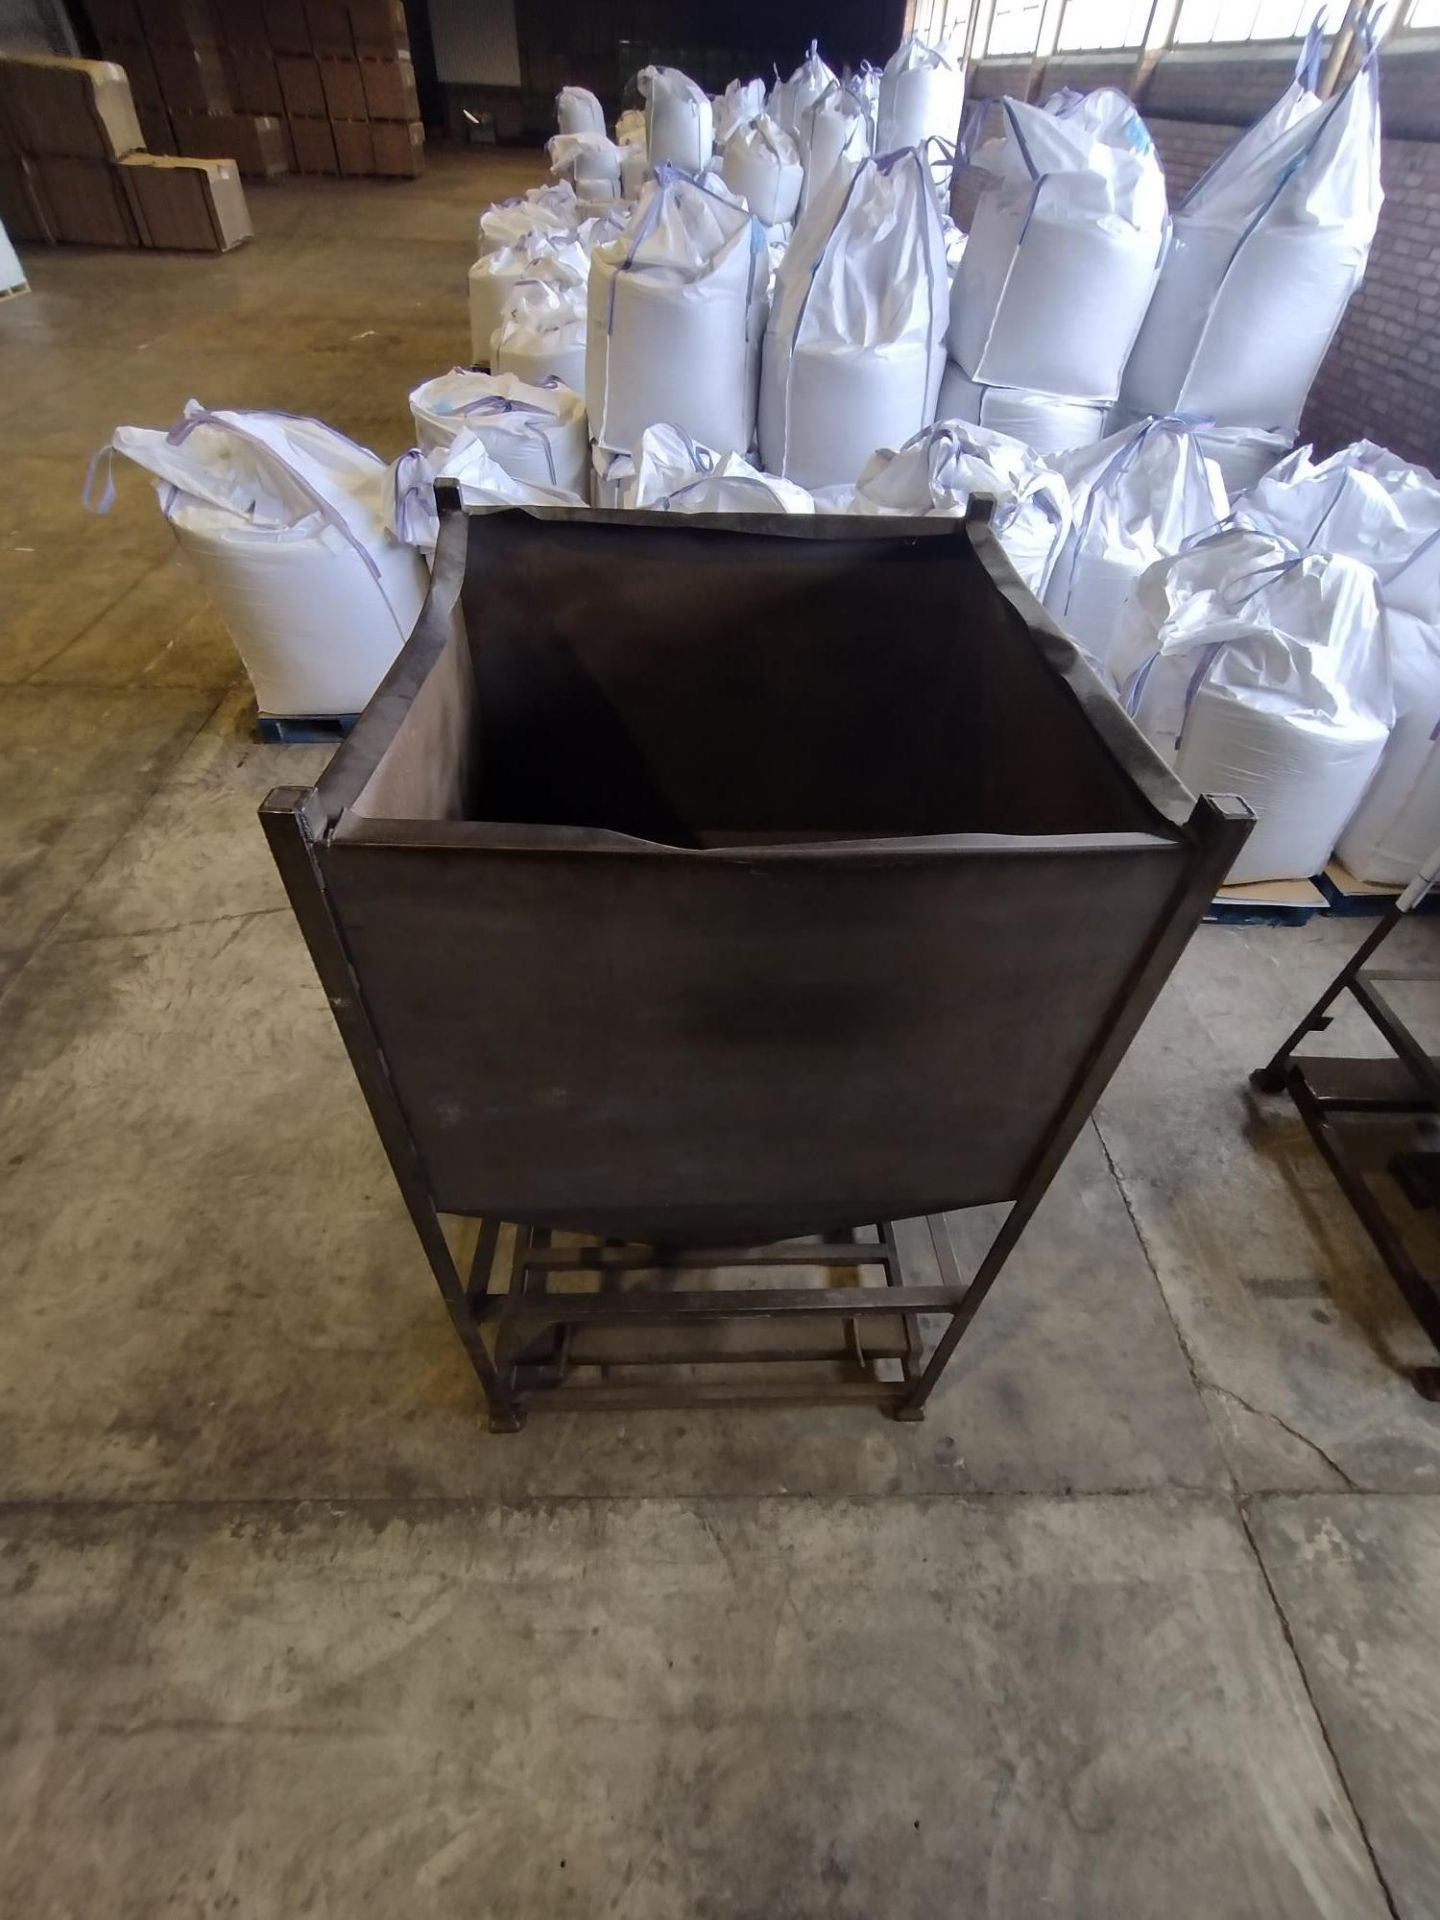 TEN HOPPER BOTTOMED TOTE BINS, approx. 1285mm x 1285mm x 1950mm. Lot located Bretherton, Lancashire. - Image 3 of 3